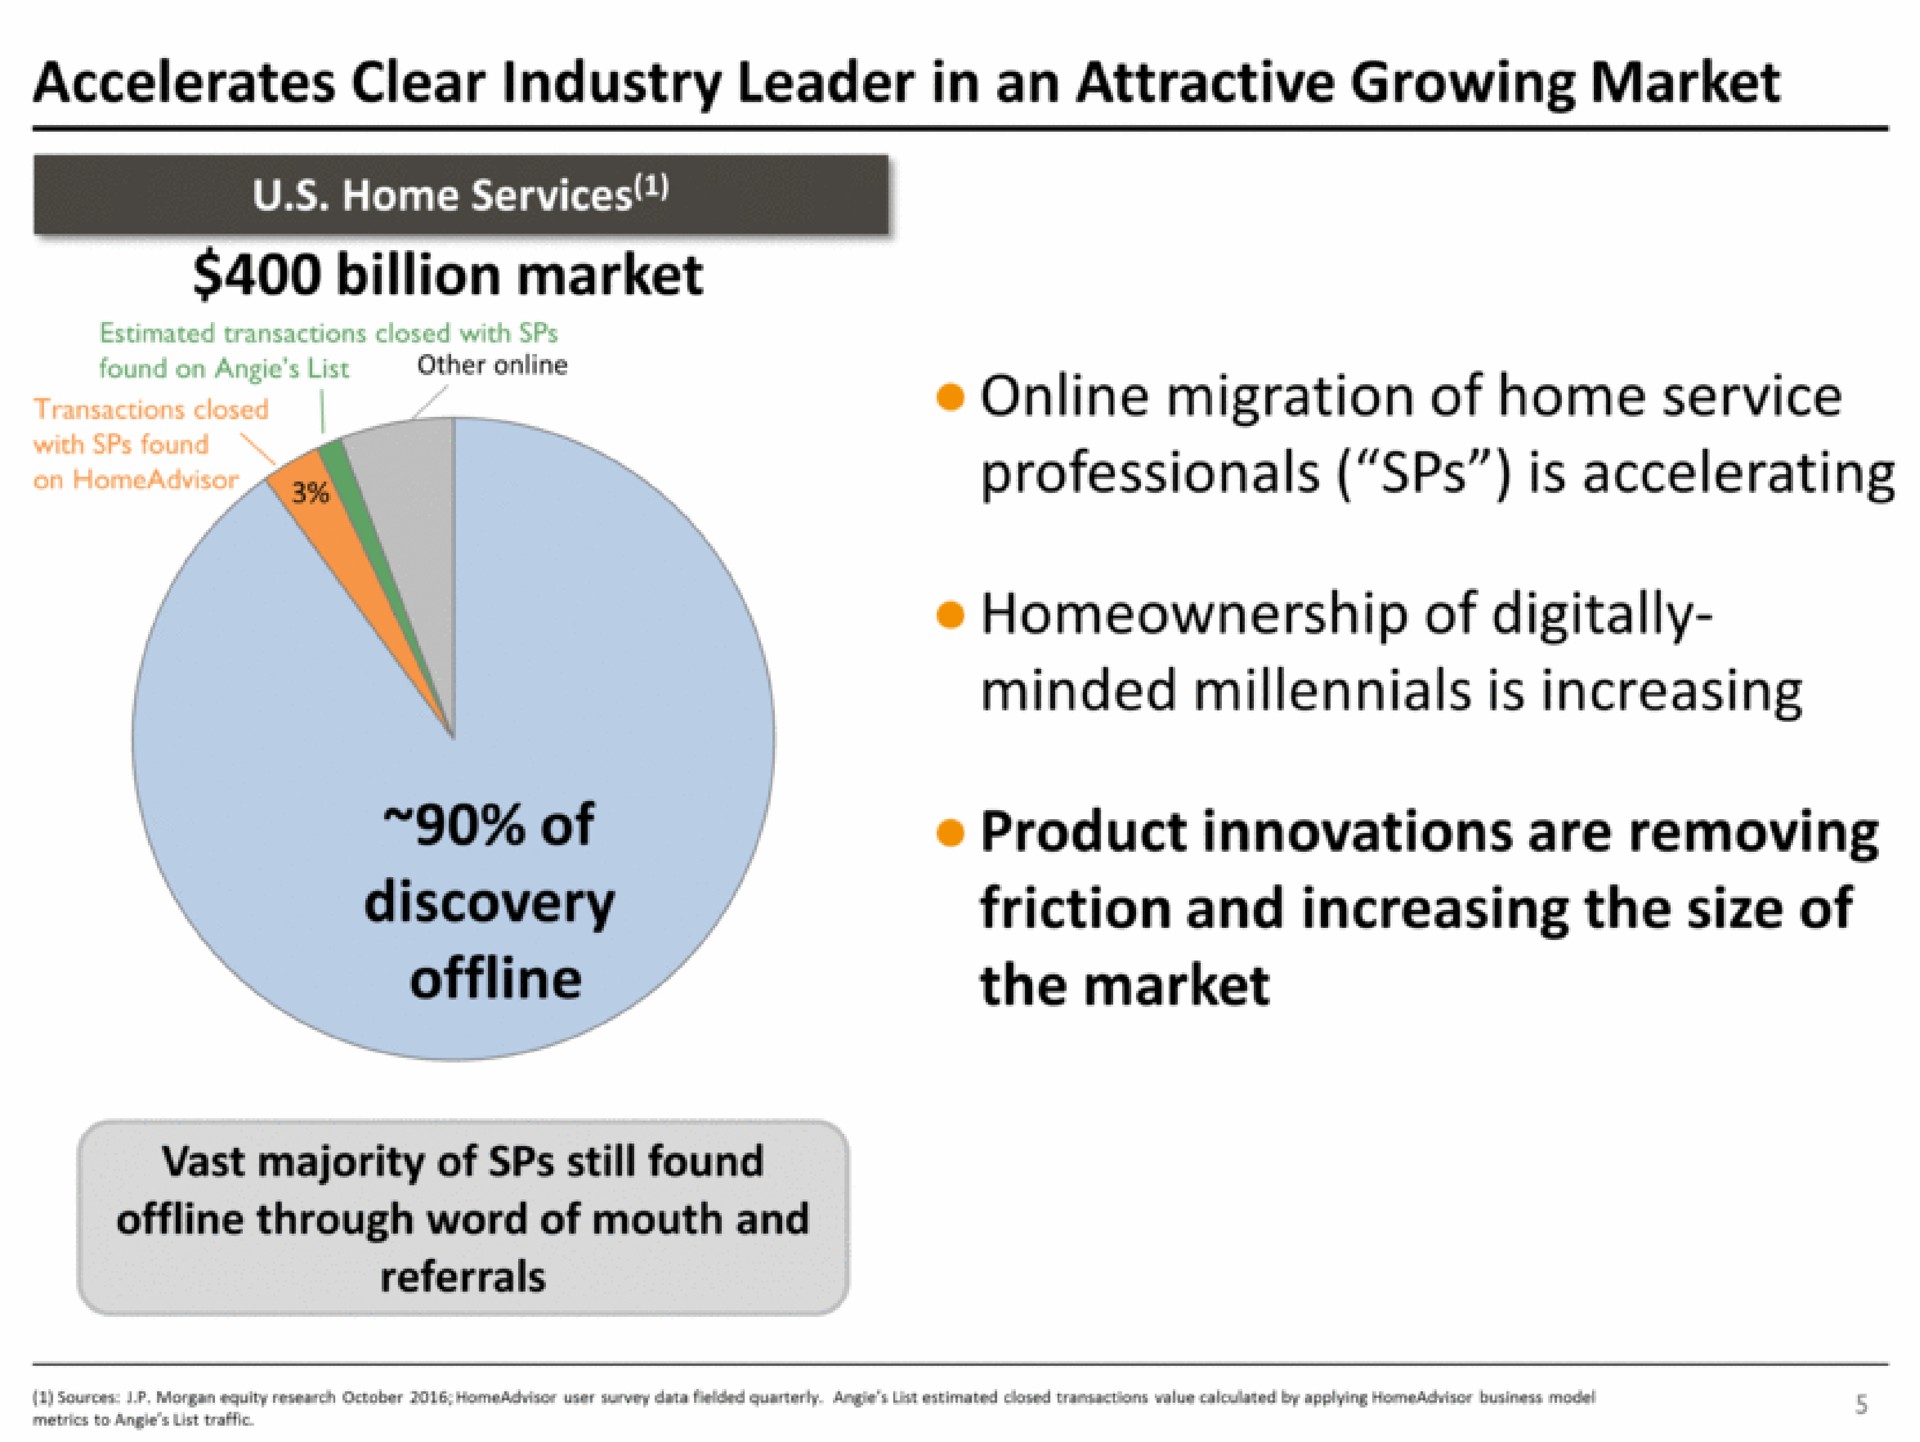 accelerates clear industry leader in an attractive growing market home services billion market migration of home service professionals is accelerating of digitally minded is increasing of discovery product innovations are removing friction and increasing the size of the market vast majority of still found through word of mouth and referrals | IAC